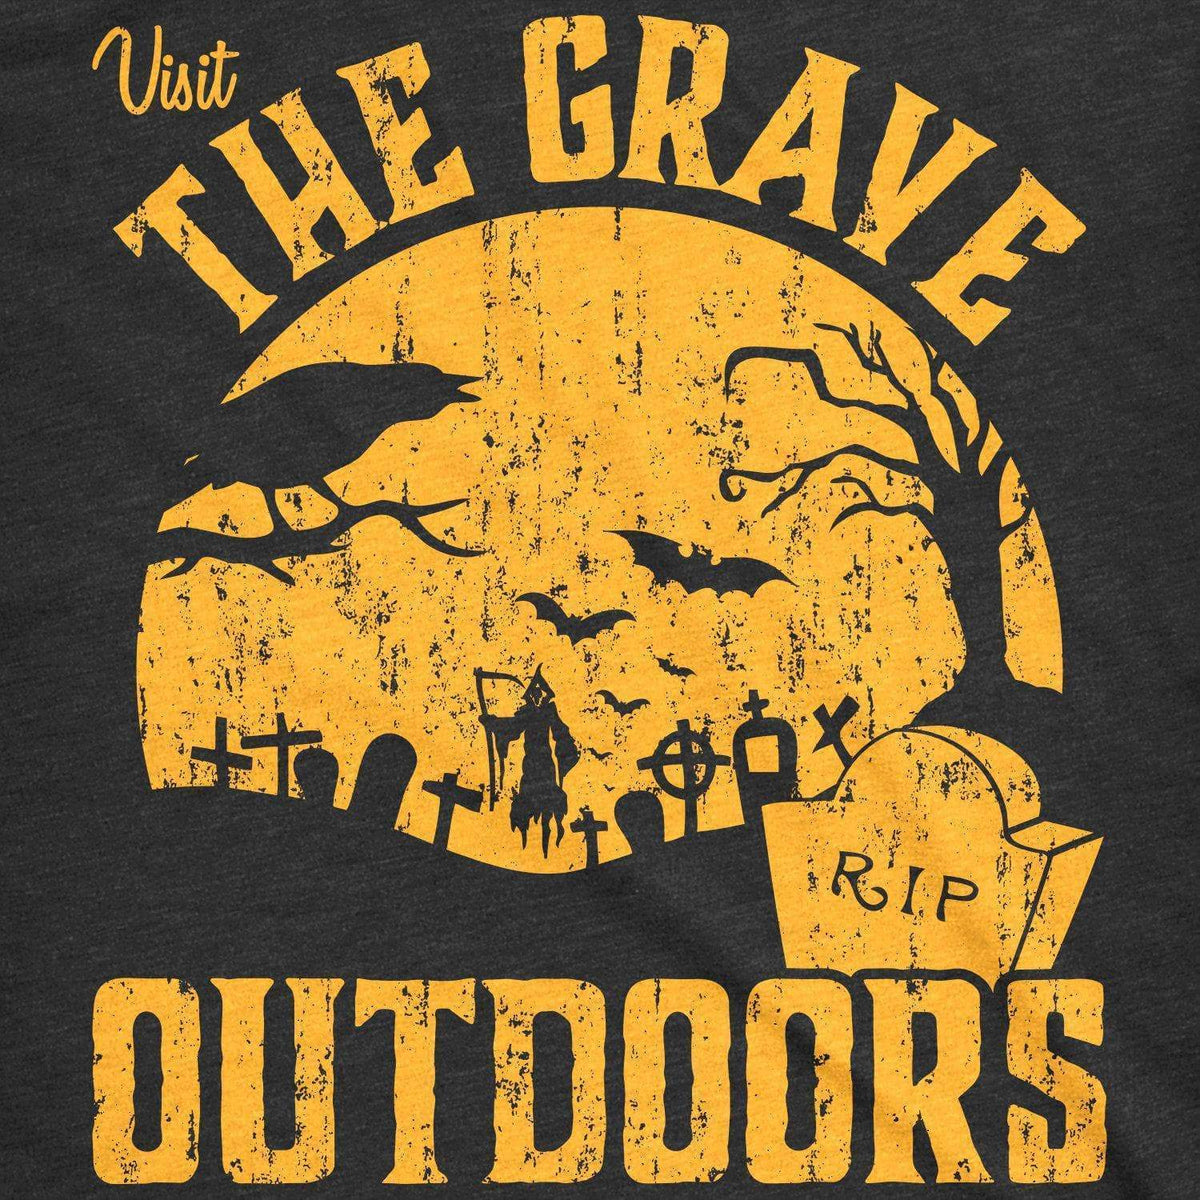 Visit The Grave Outdoors Women&#39;s Tshirt - Crazy Dog T-Shirts